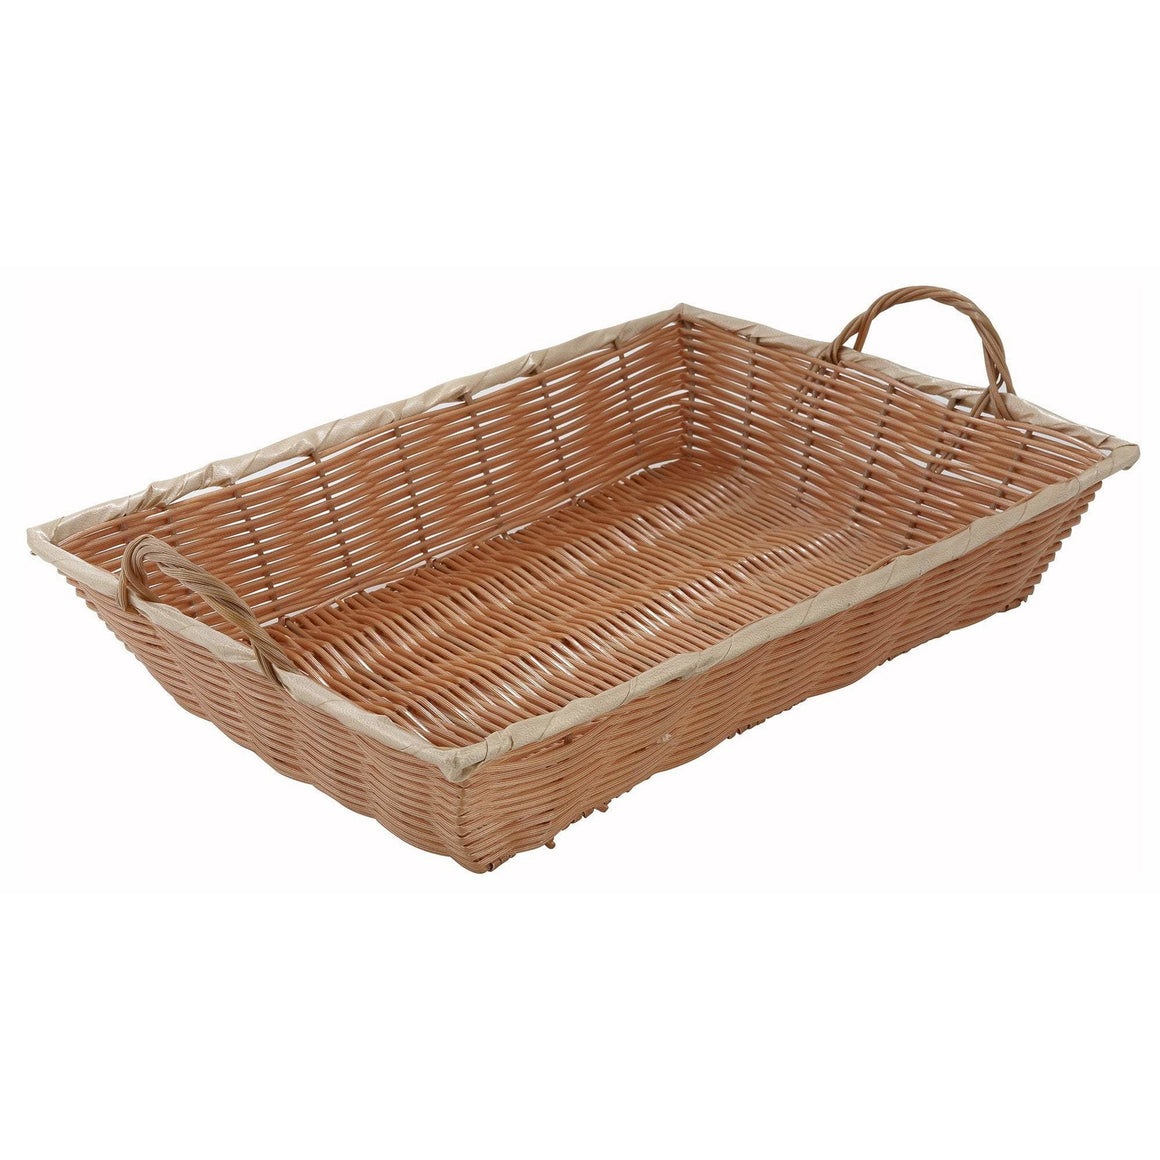 Winco - PWBN-16B - Poly Woven Basket, Rectangular w/Hdls, 16" x 11" x 3", Natural - Tabletop - Maltese & Co New and Used  restaurant Equipment 